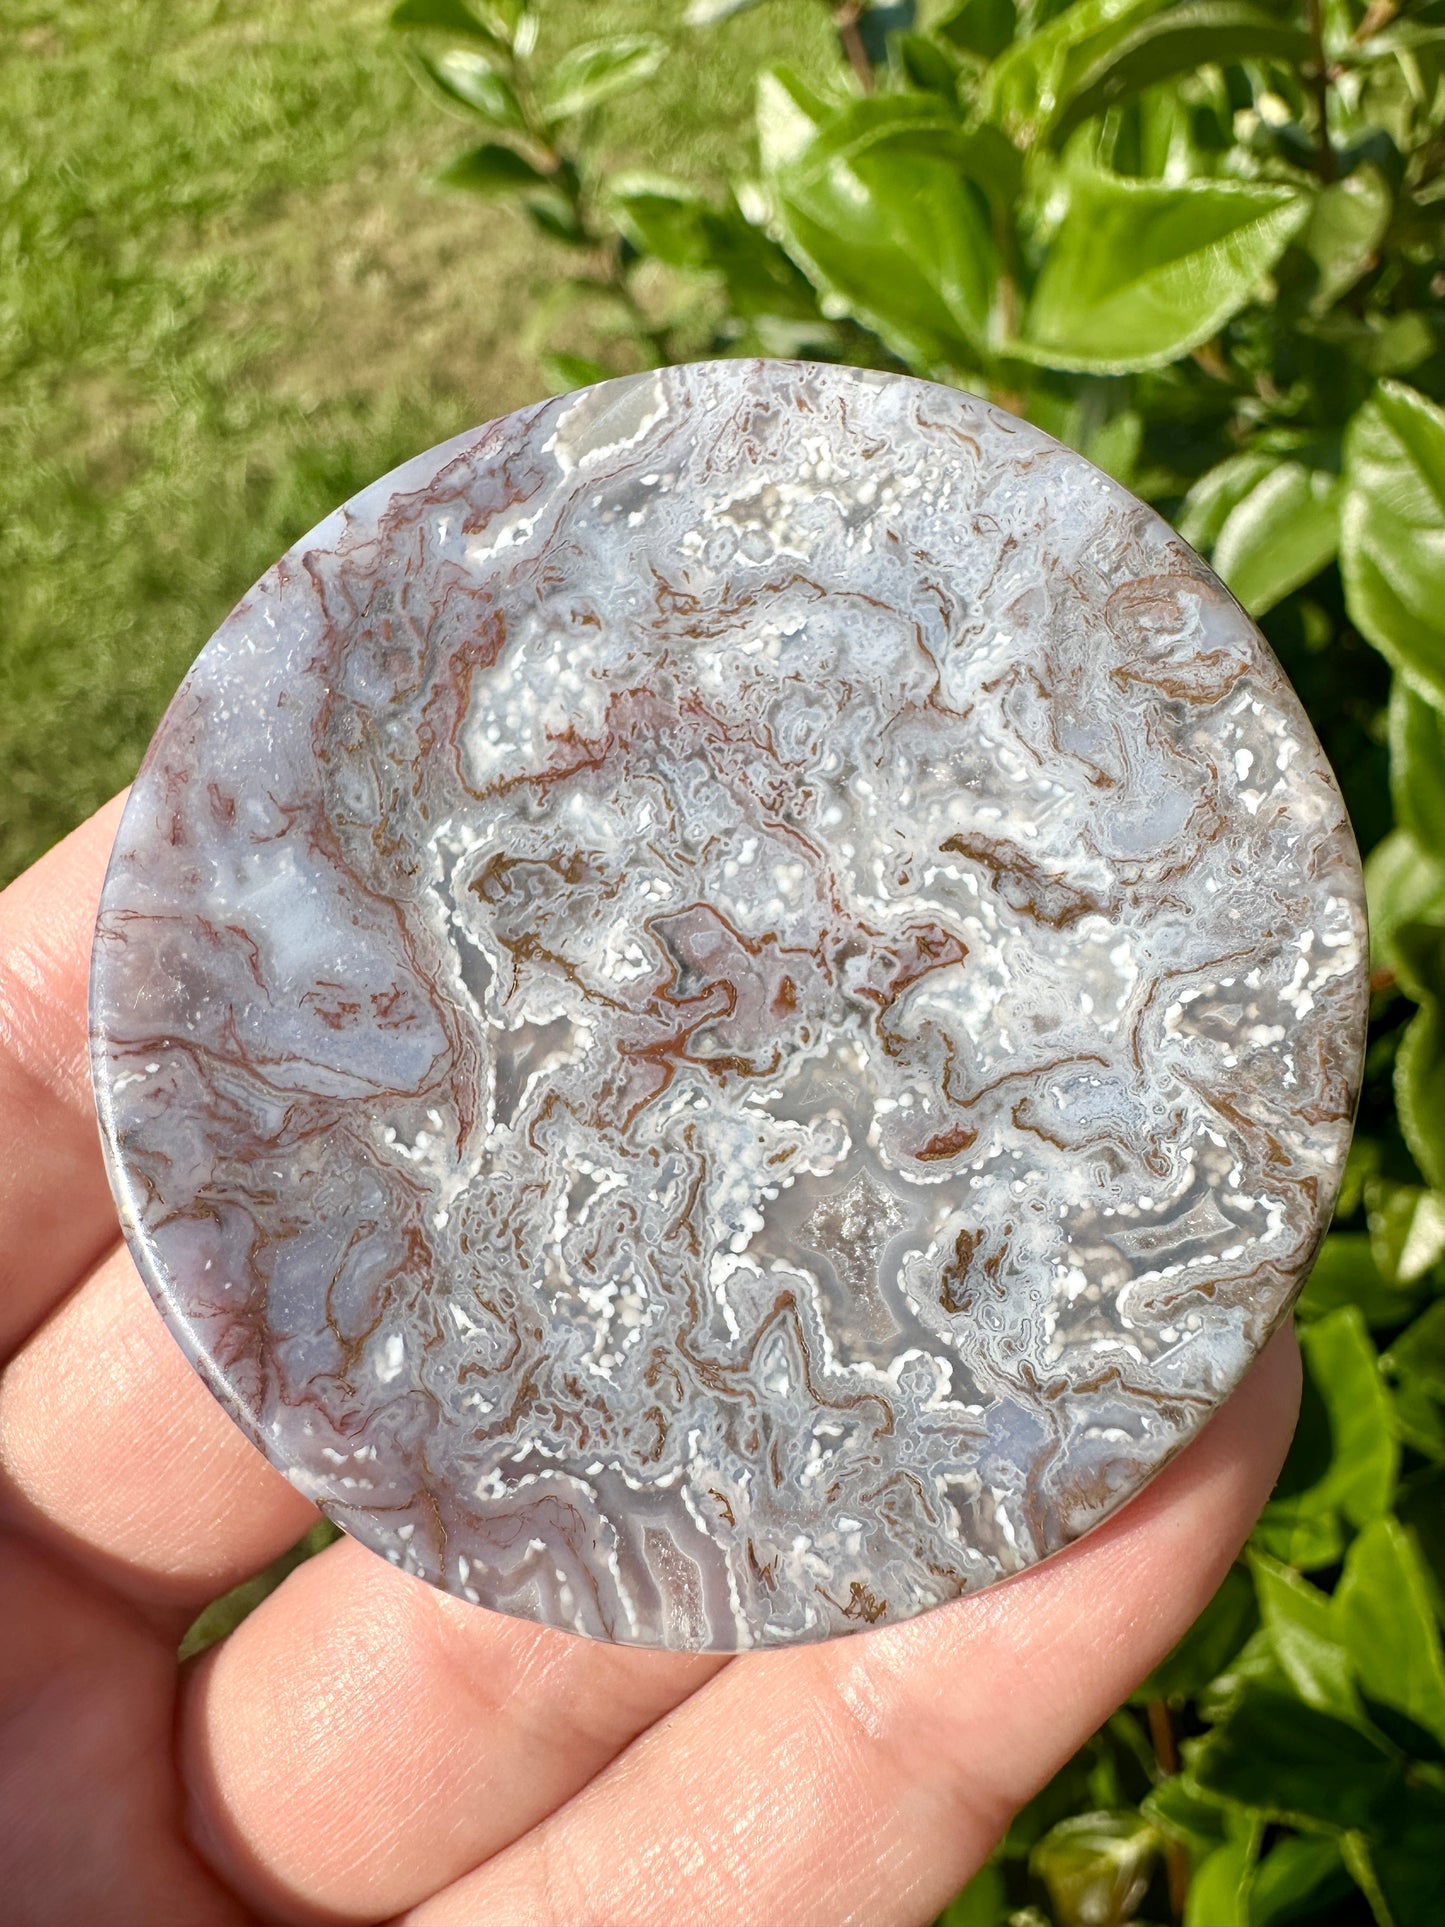 Stunning Ocean Jasper Bowl - Unique Decorative Piece for Home or Office, Enhance Your Space with Natural Earthy Tones